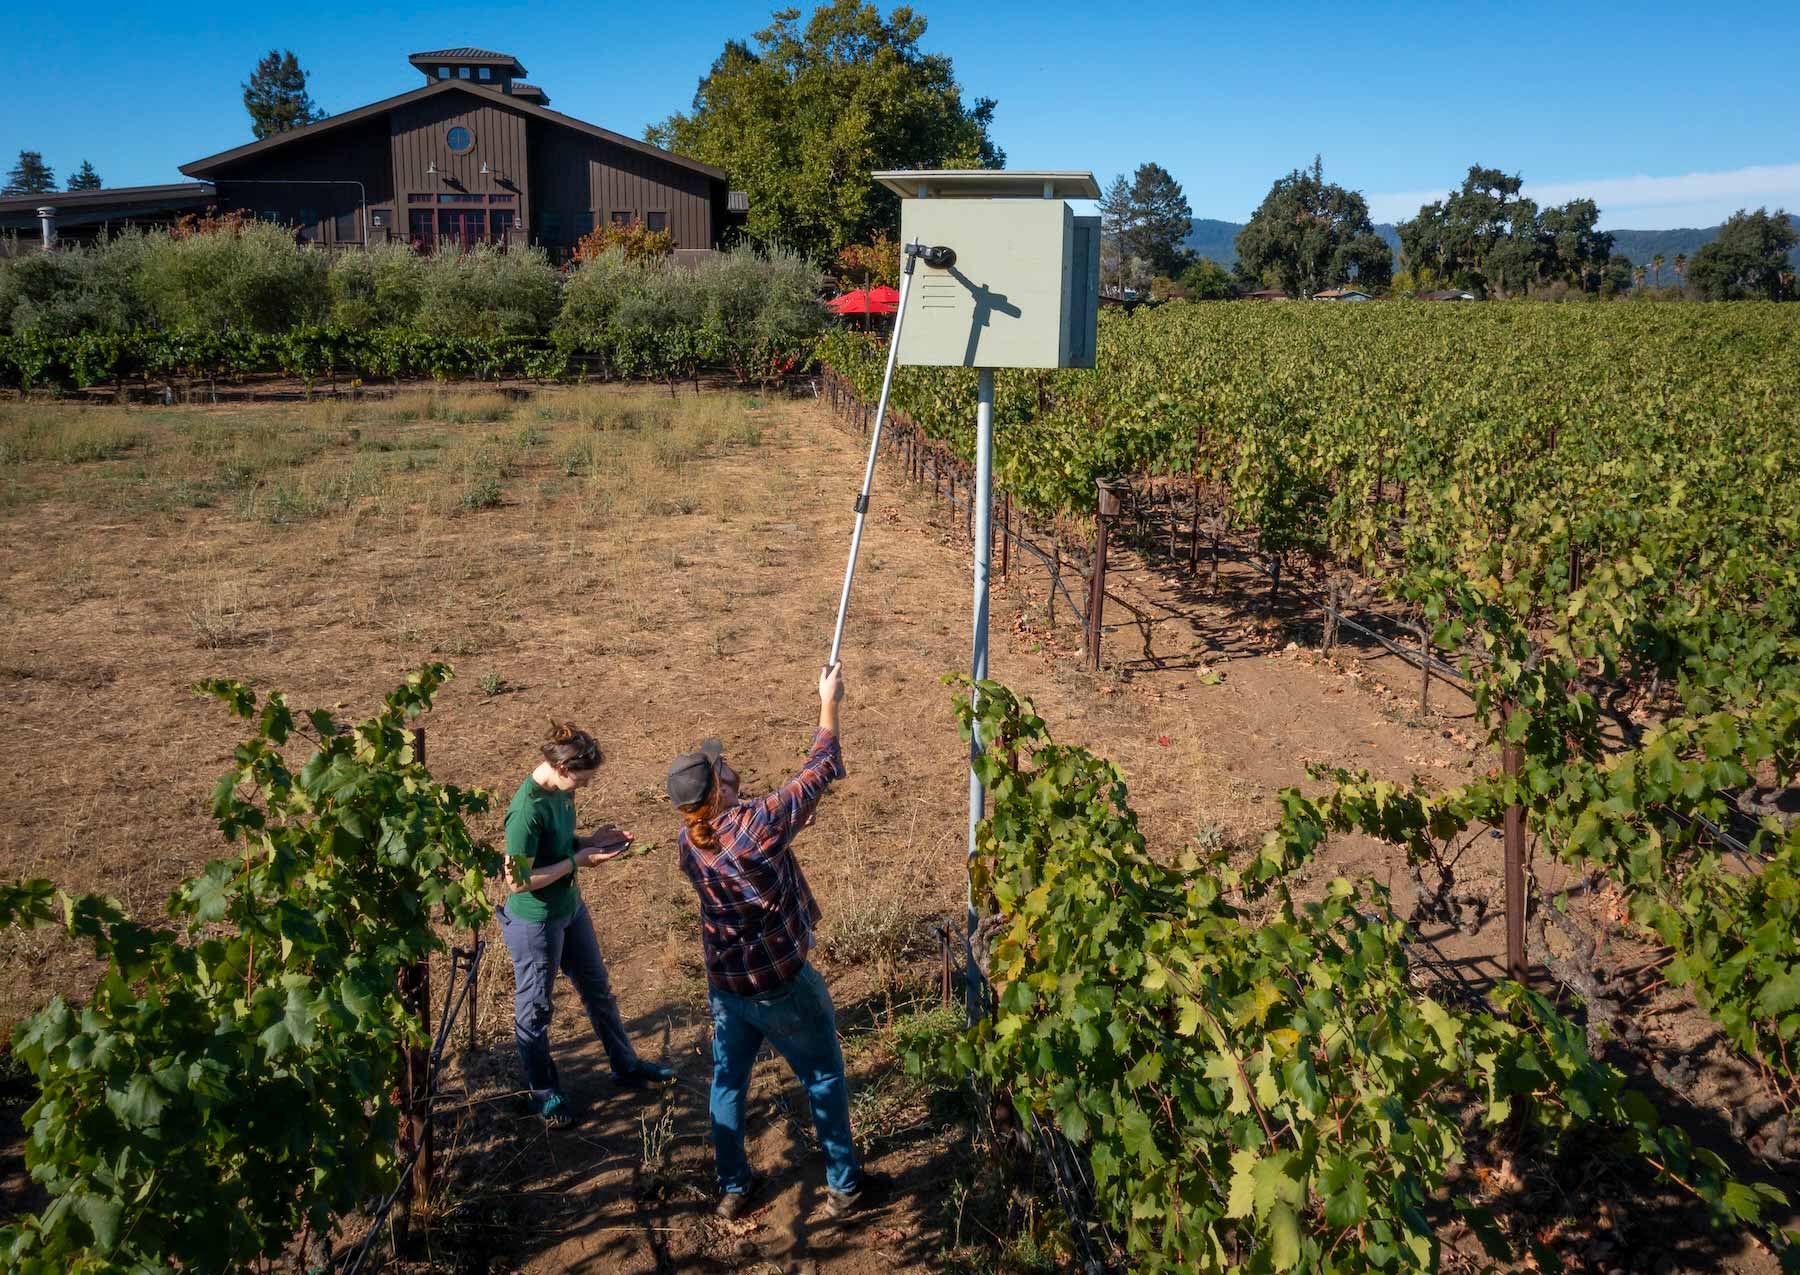 two people in the vineyard with a stick camera looking into an owl box